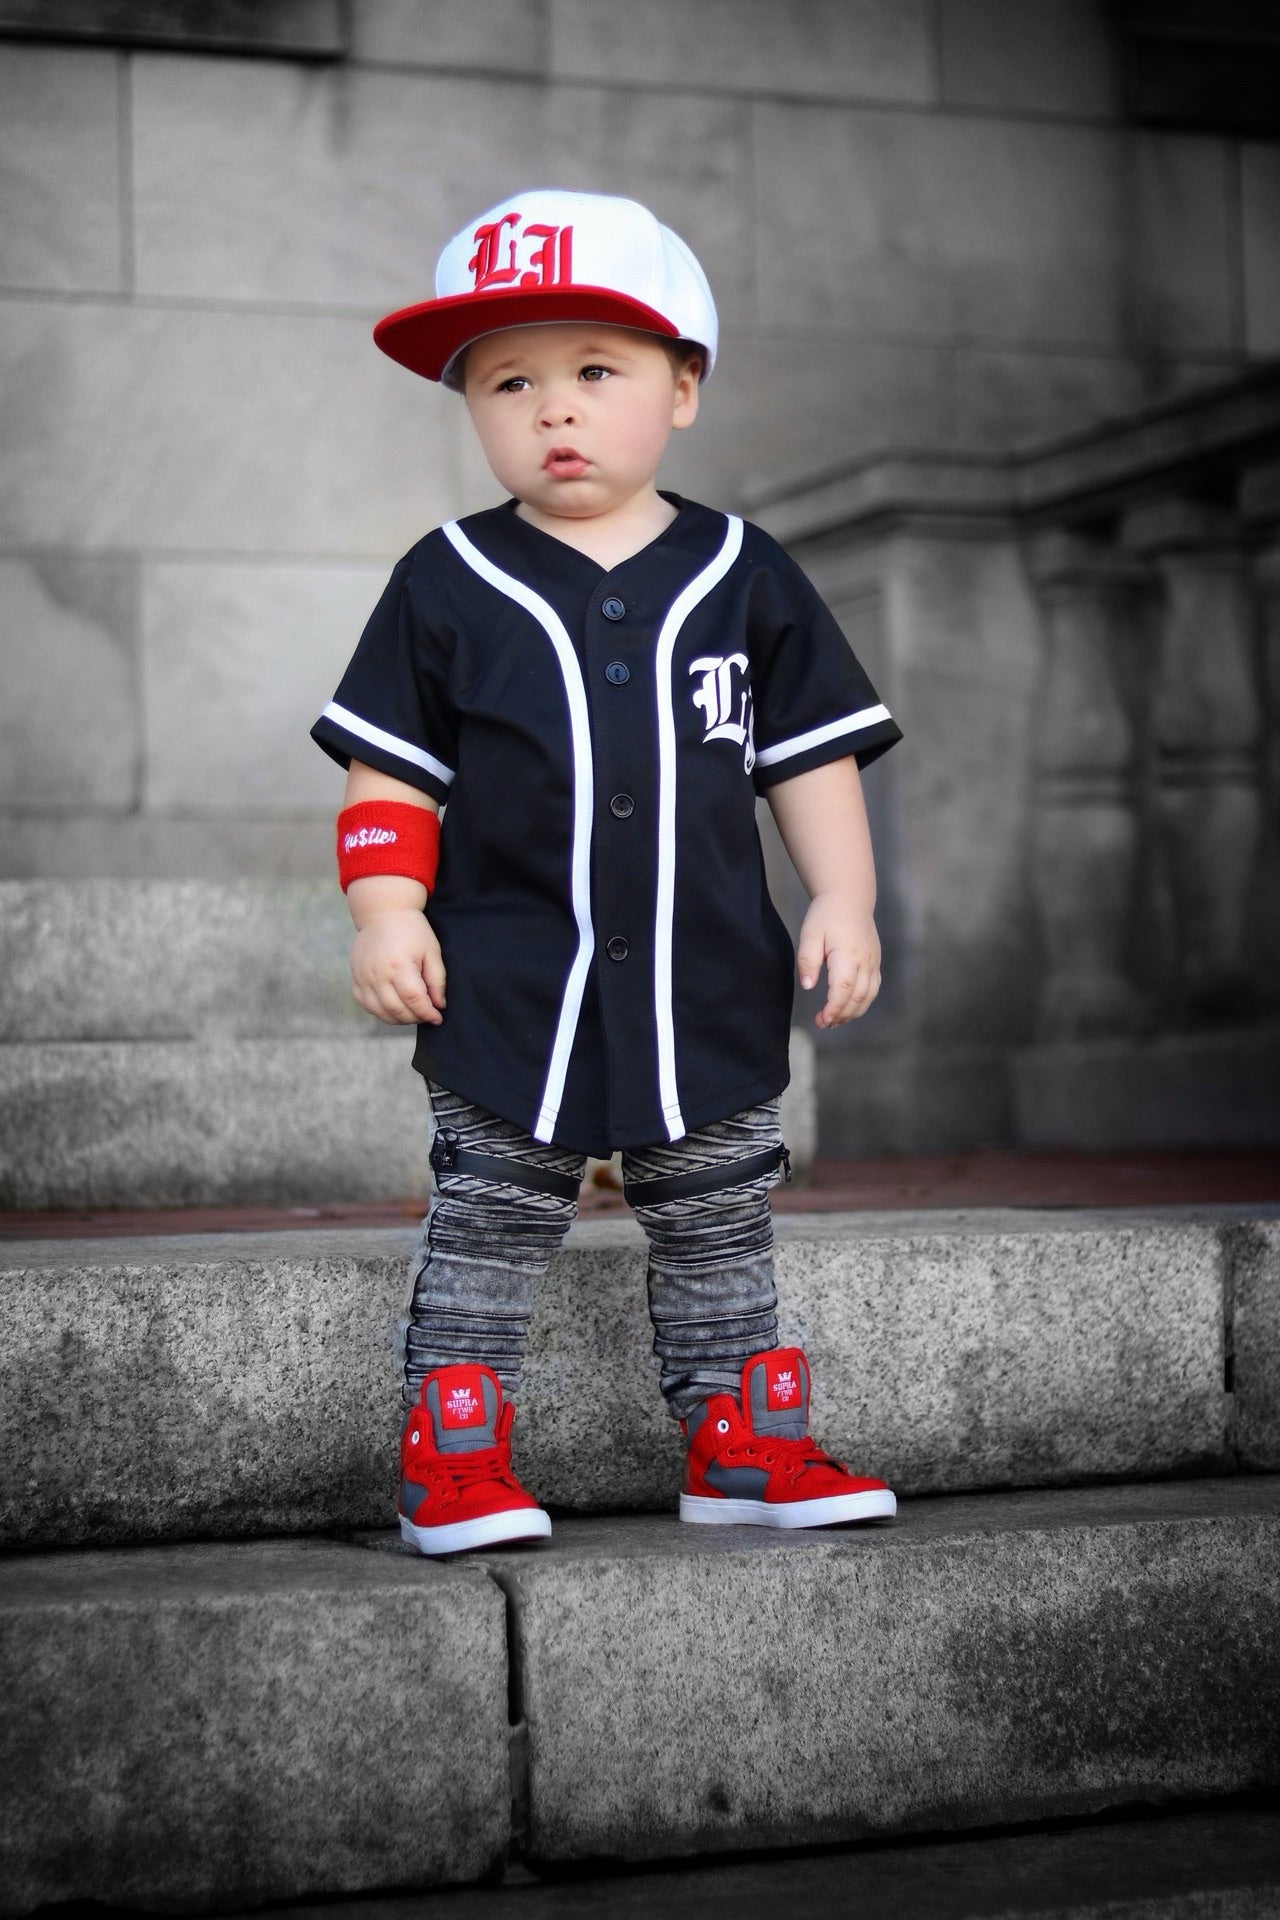 swag baseball jersey outfits